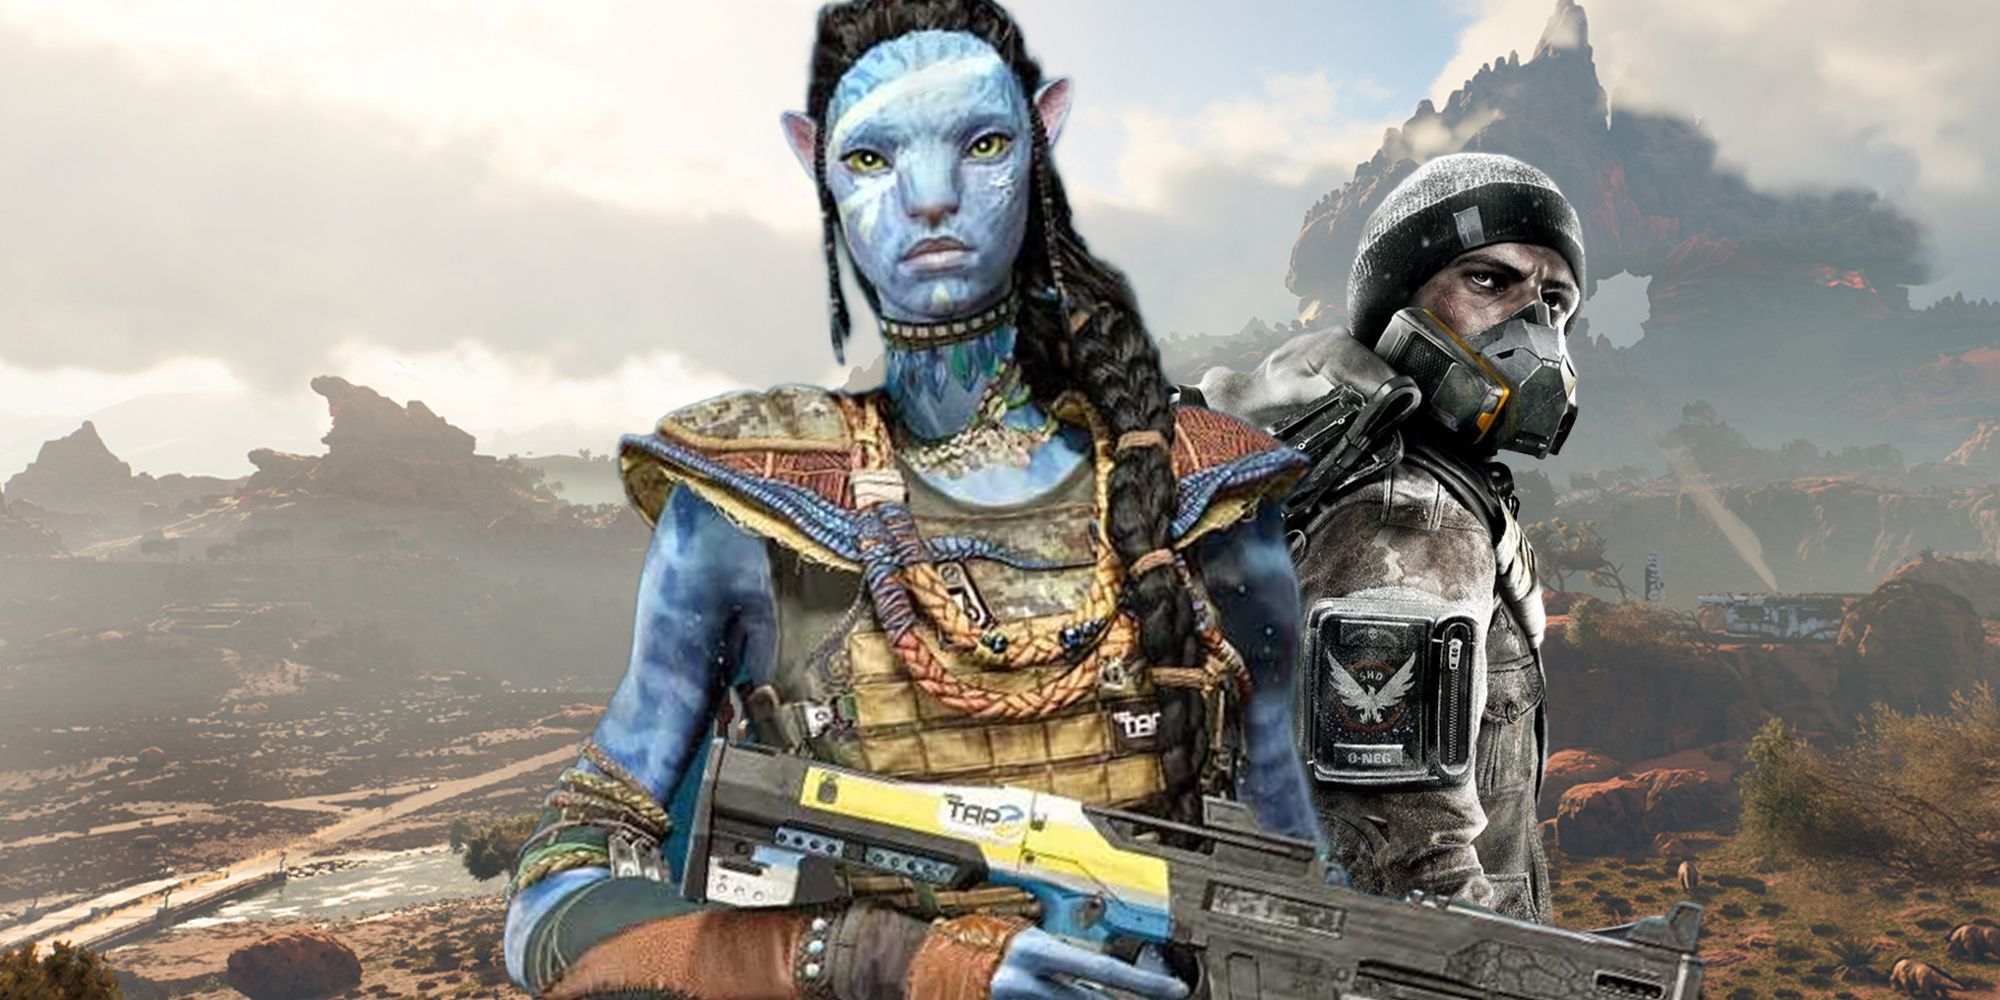 Characters from Avatar: Frontiers of Pandora and The Division series with Star Wars Outlaws in the background